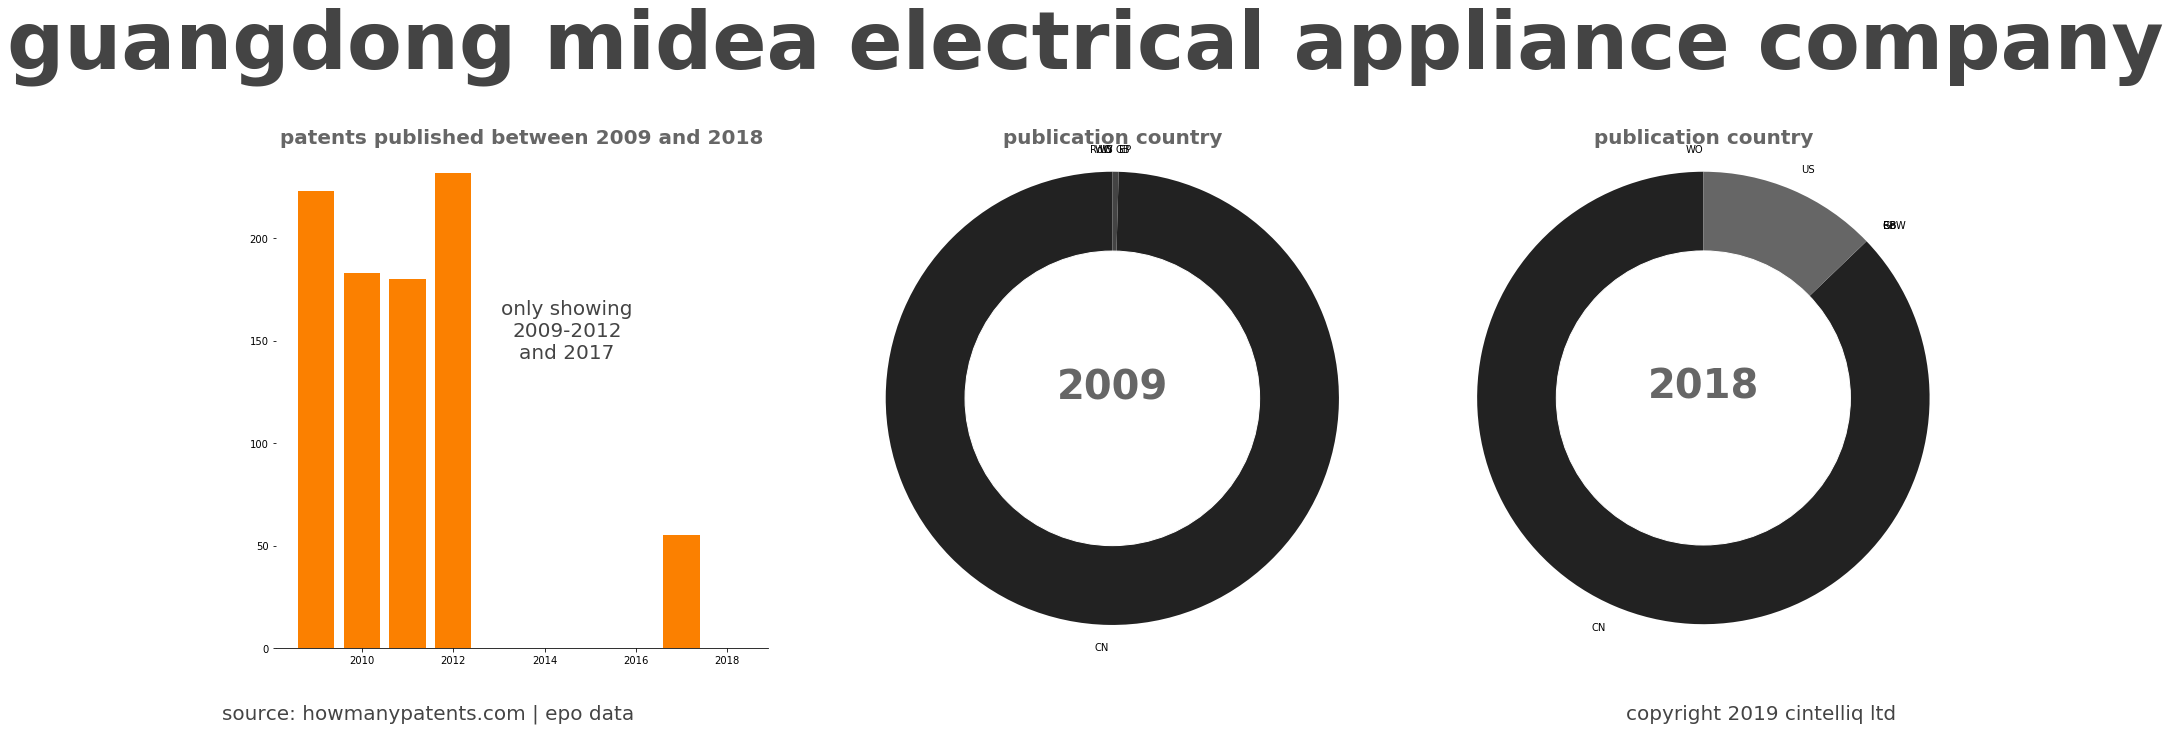 summary of patents for Guangdong Midea Electrical Appliance Company